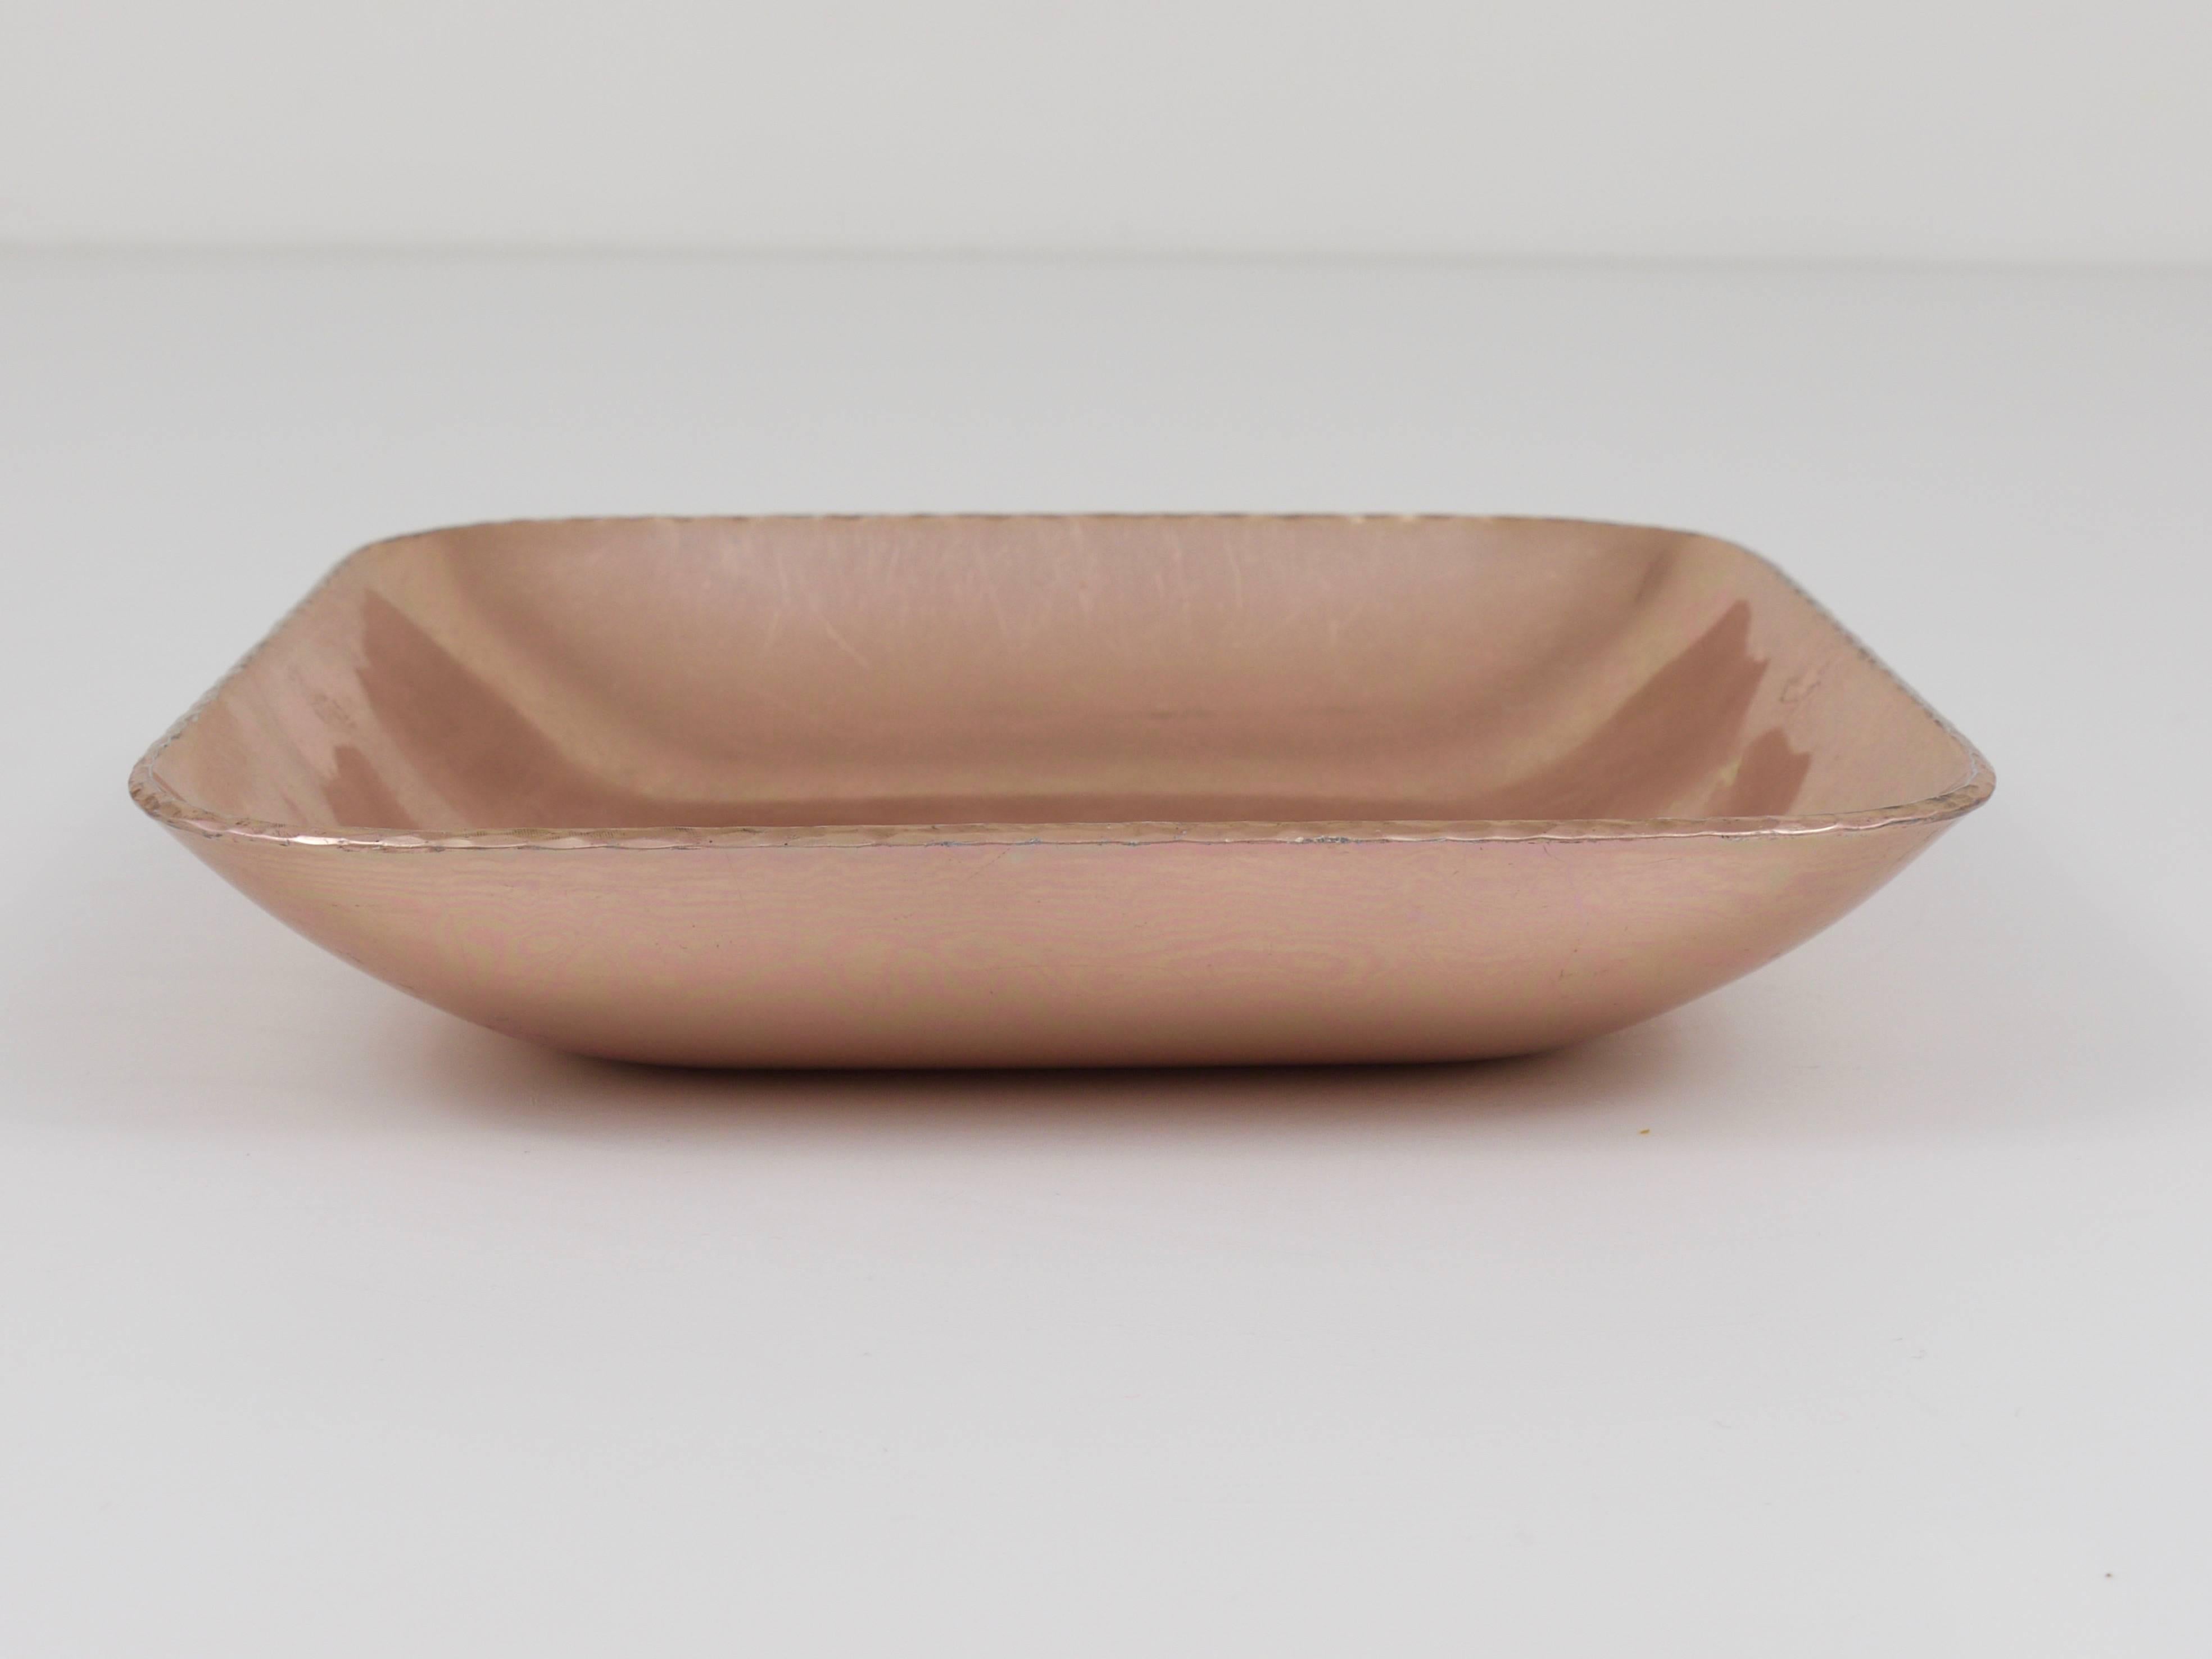 A square, pink-anodized bowl, handmade of aluminum, attributed to Fritz August Breuhaus de Groot. Executed by Zeppelin Metallwerke in the early 1930s, made as tableware for the Zeppelin airships, but very suitable as a jewelry bowl or vide-poche. 